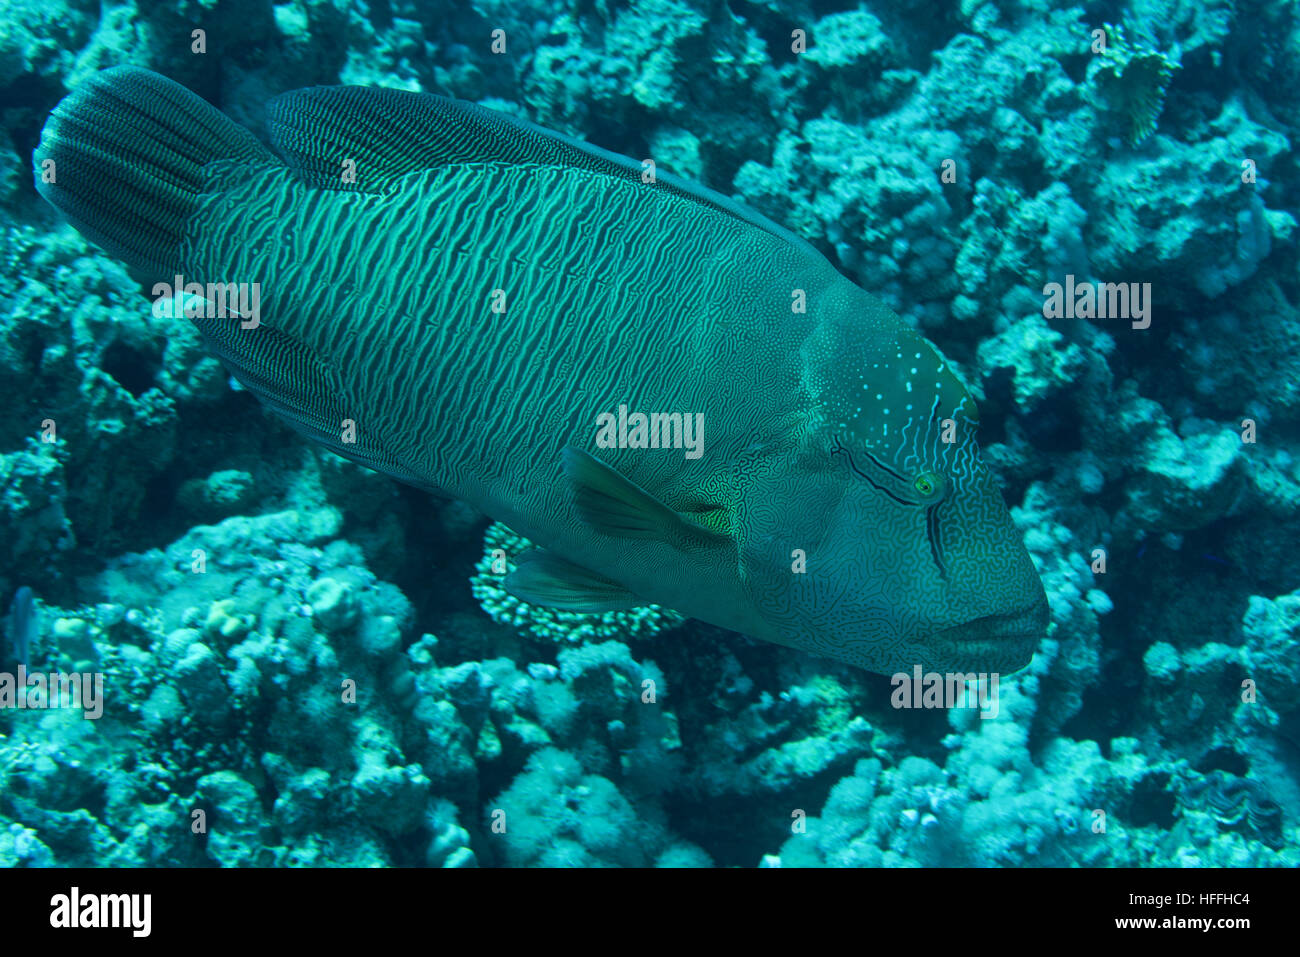 Napoleonfish, Double-headed parrot-fish, Giant maori wrasse or Humphead maori wrasse (Cheilinus undulatus)  floats in the background of a coral reef Stock Photo